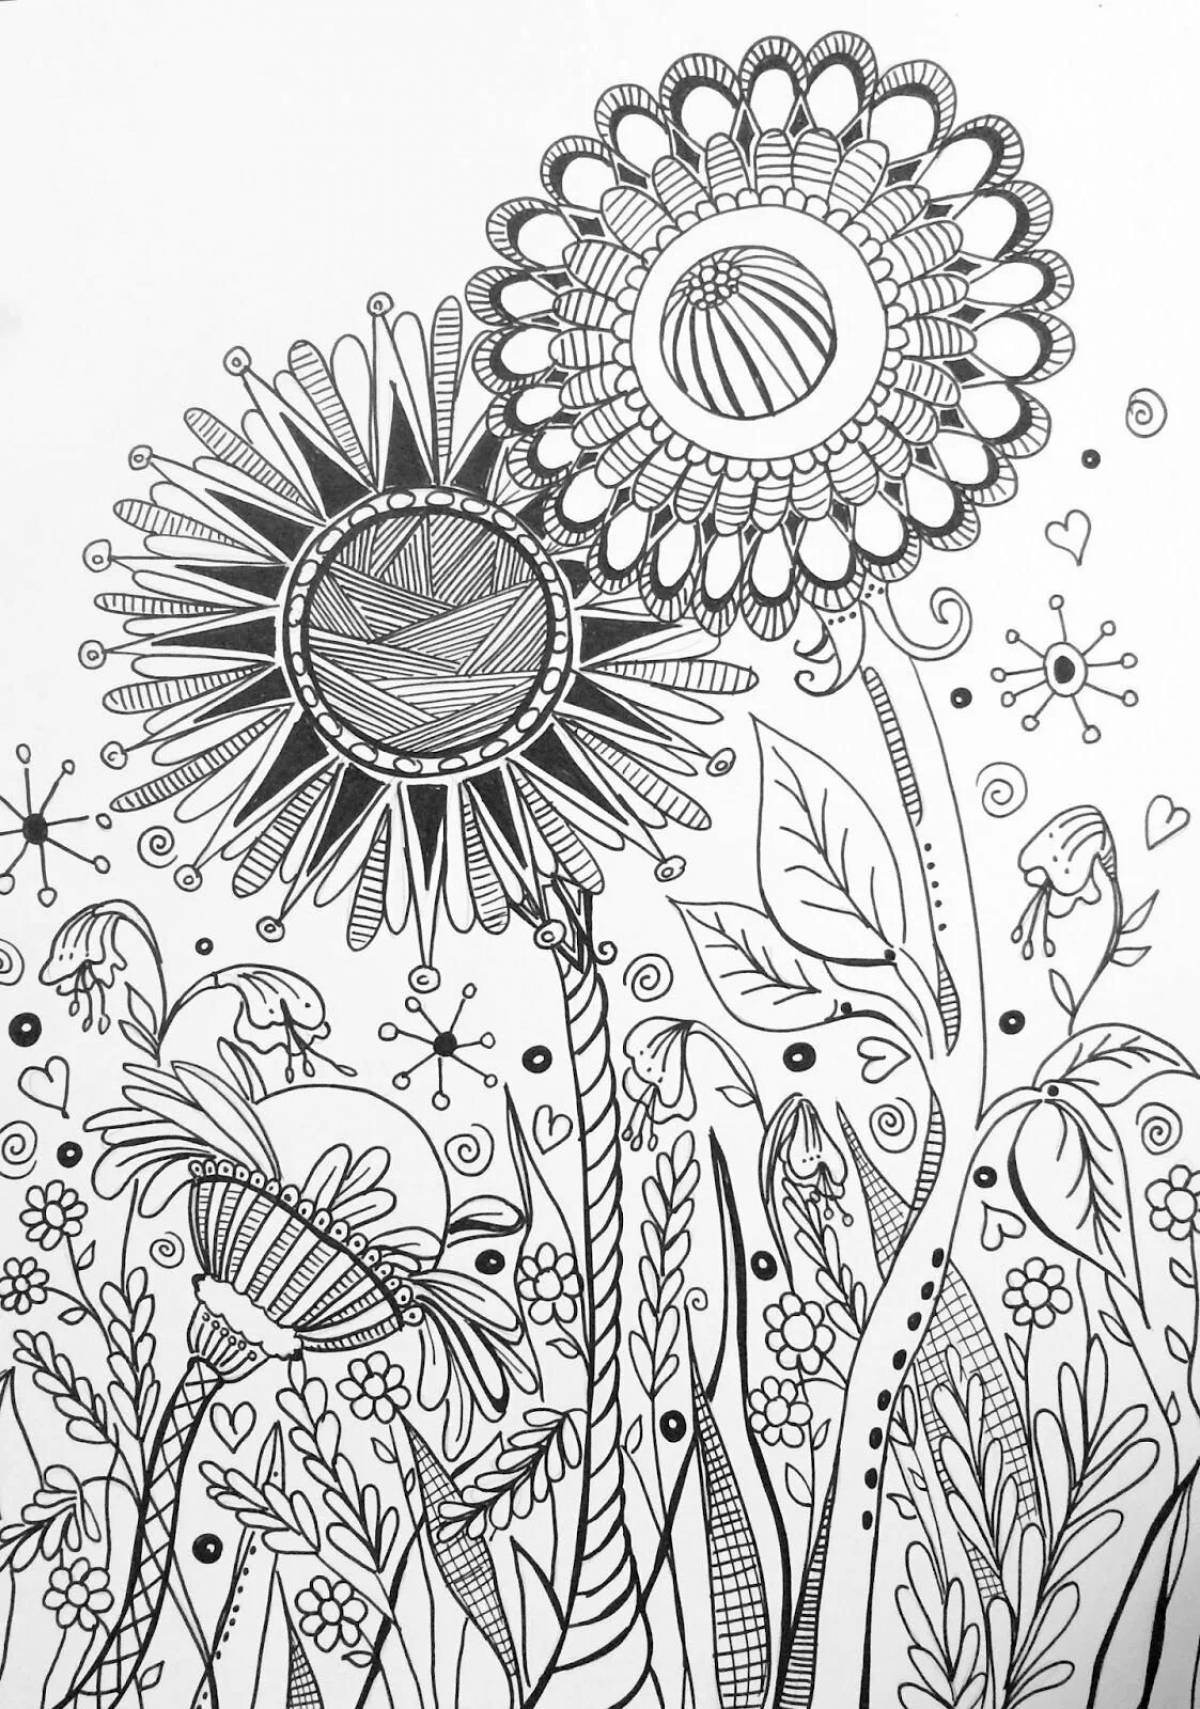 Coloring therapy